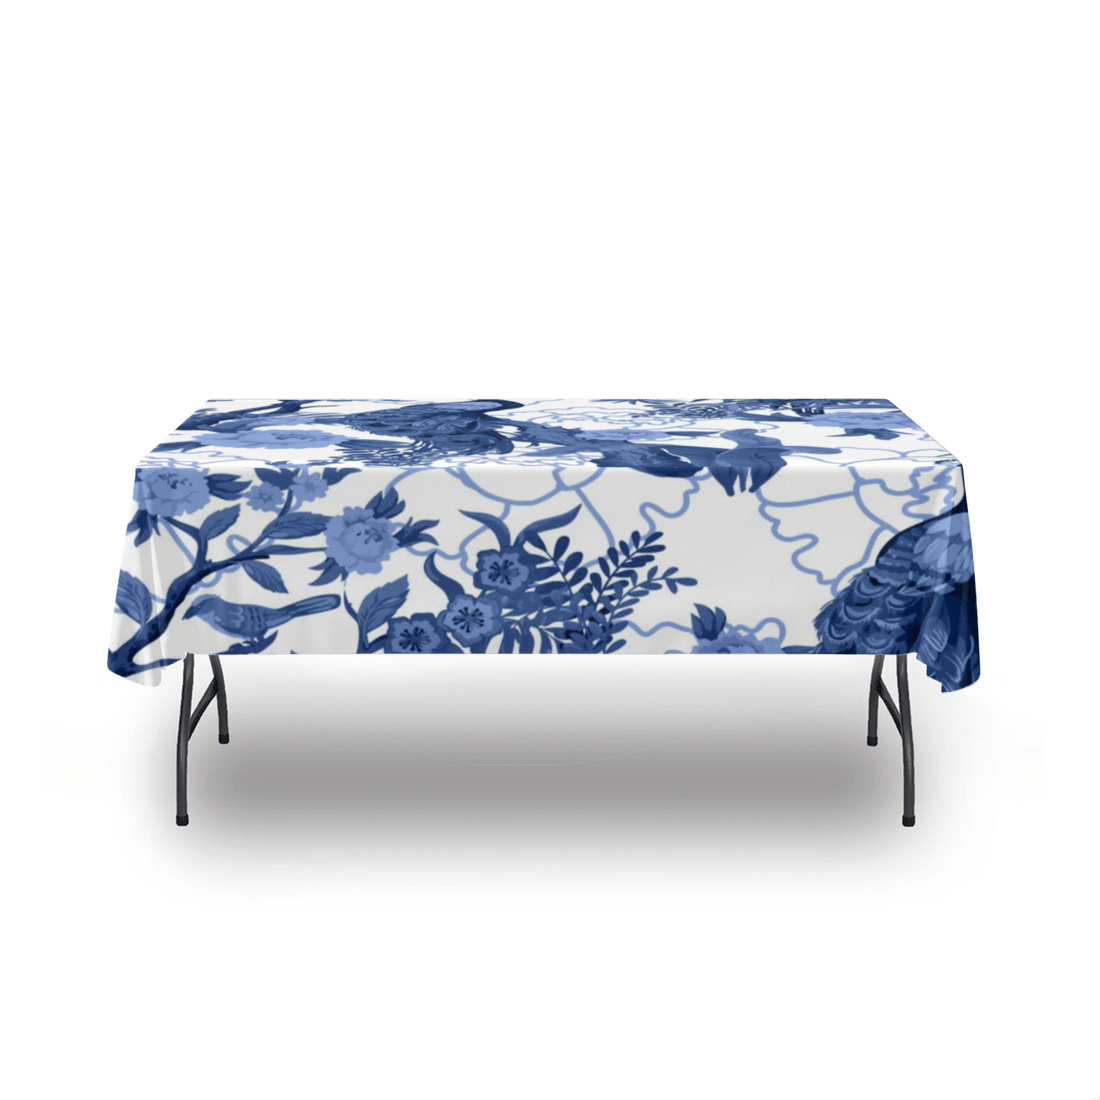 kate-mcenroe-nyc Chinoiserie Blue Peacock Tablecloth, Elegant Floral Bird Design, Classic Table Linen Tablecloths 54&quot; x 72&quot; 100224